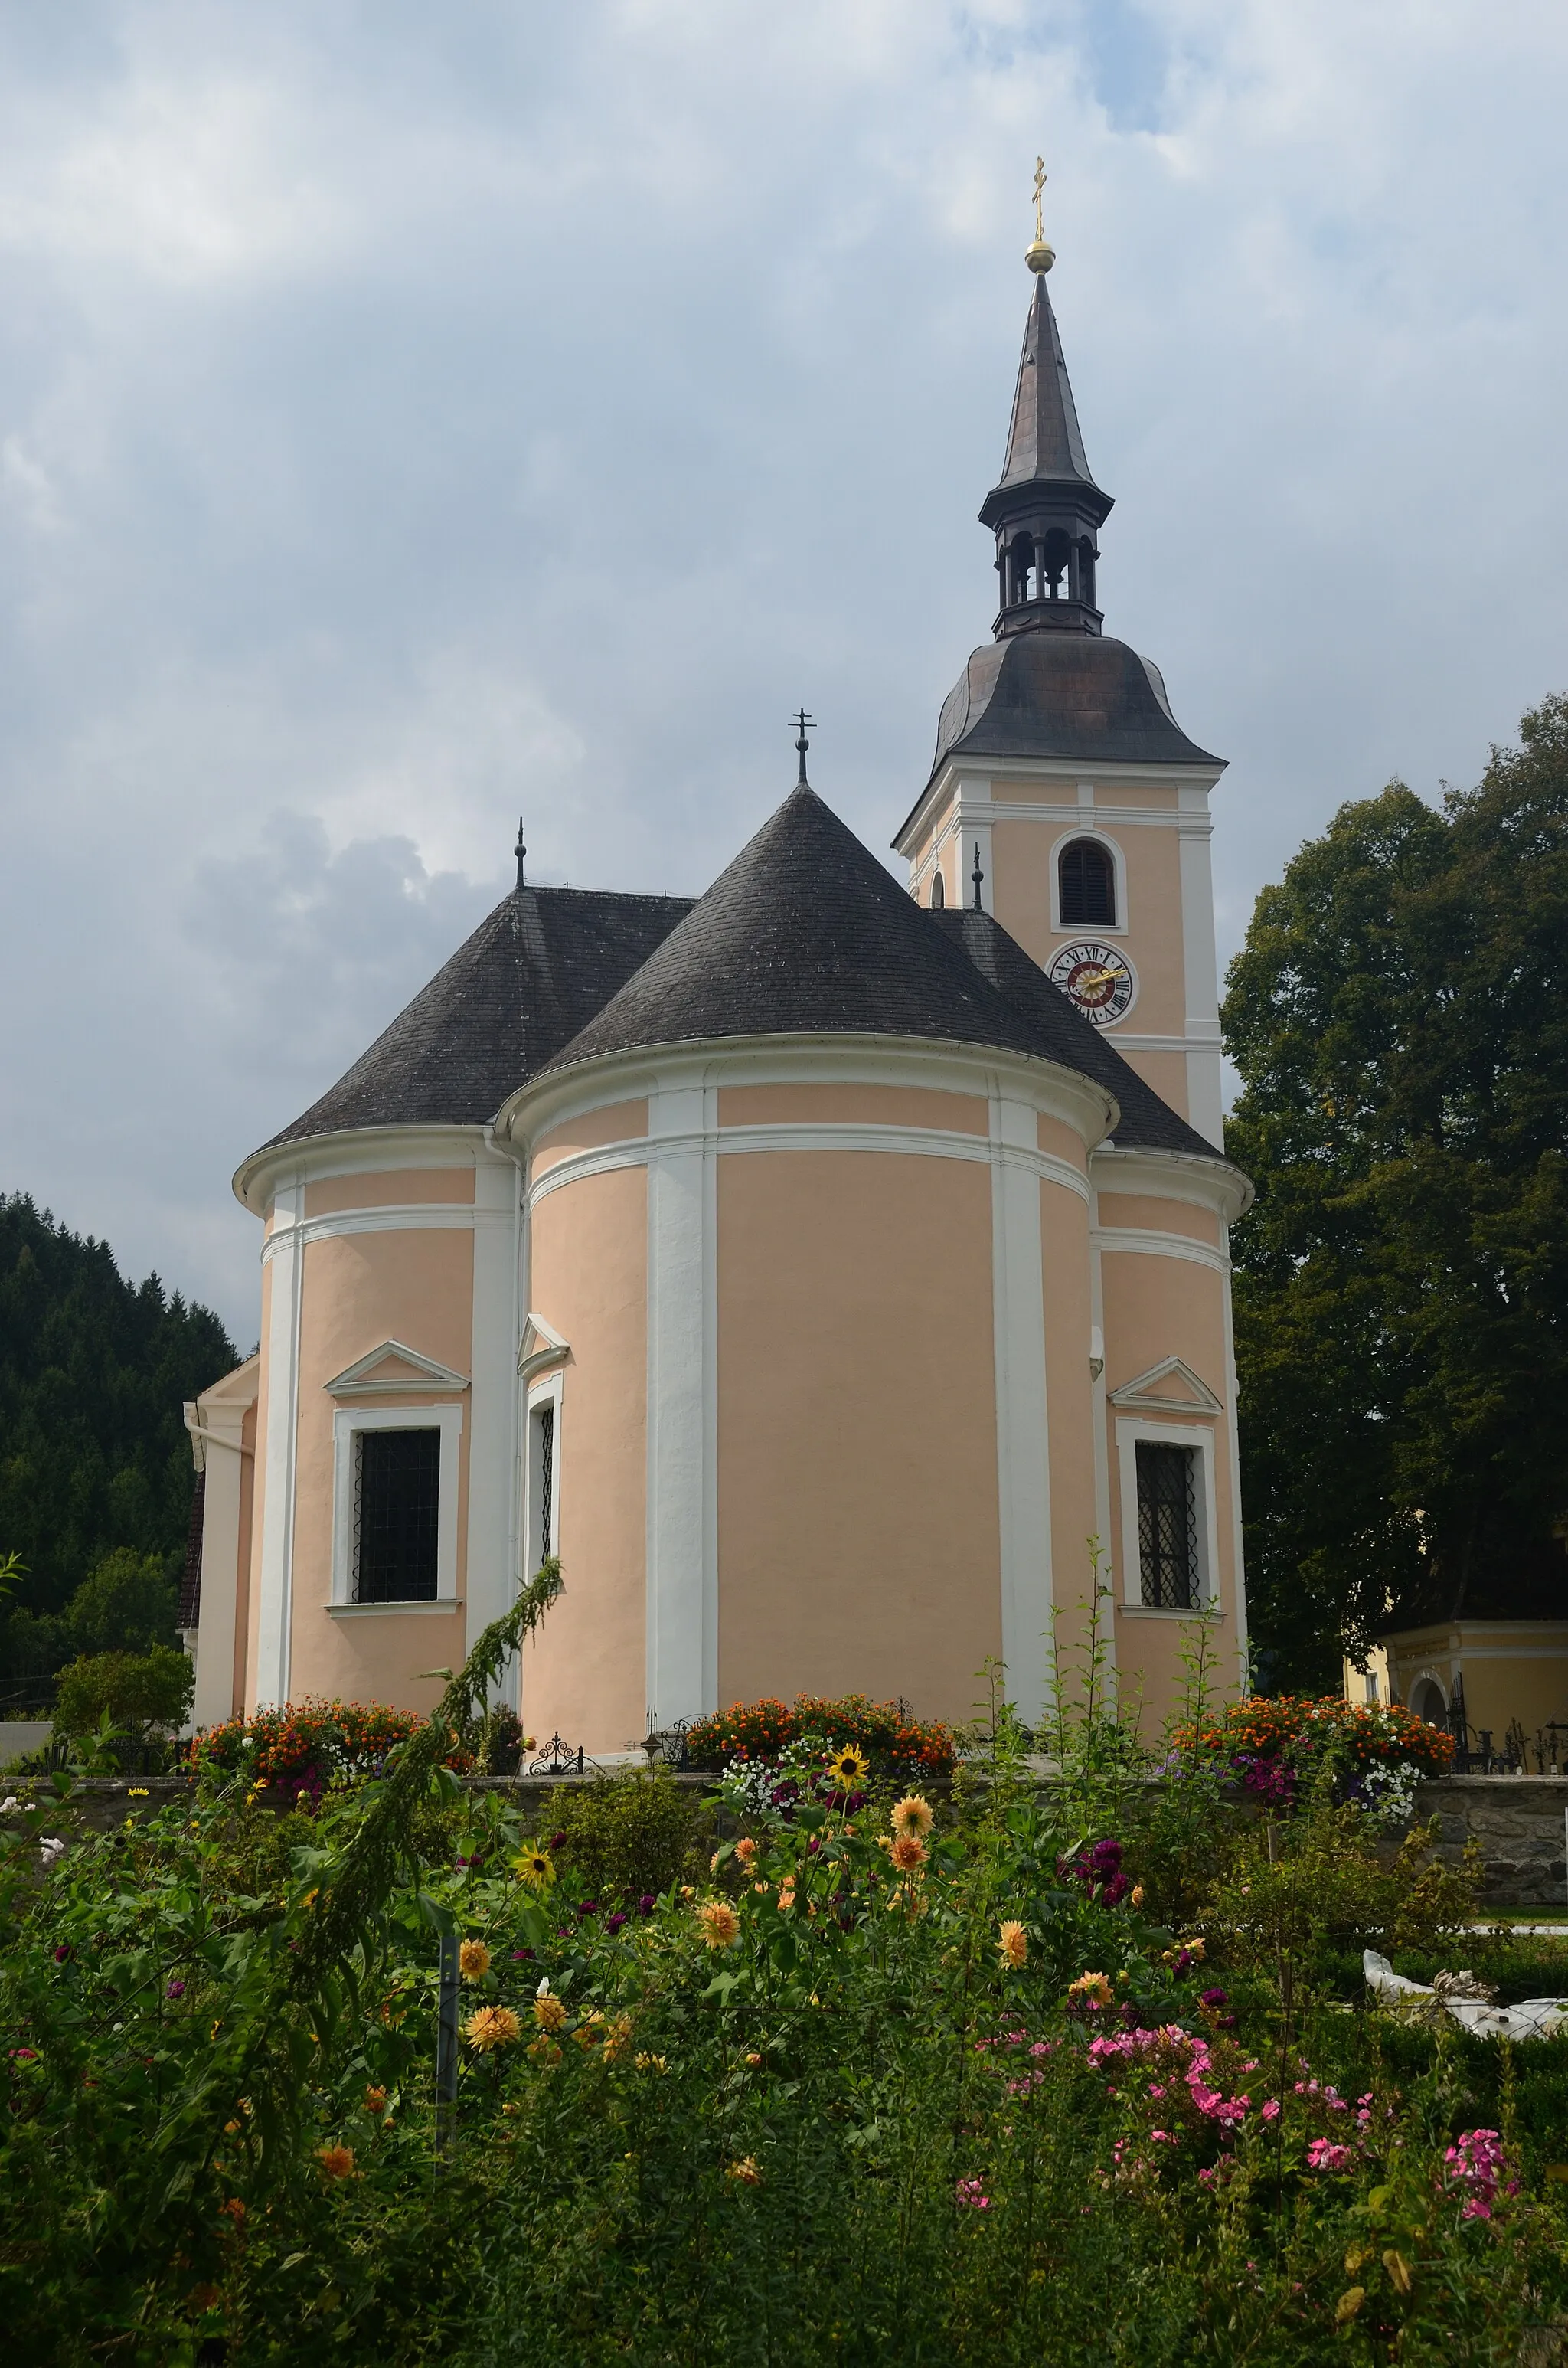 Photo showing: Parish church Saint Peter & Paul, Mönichwald, Styria, is protected as a cultural heritage monument.